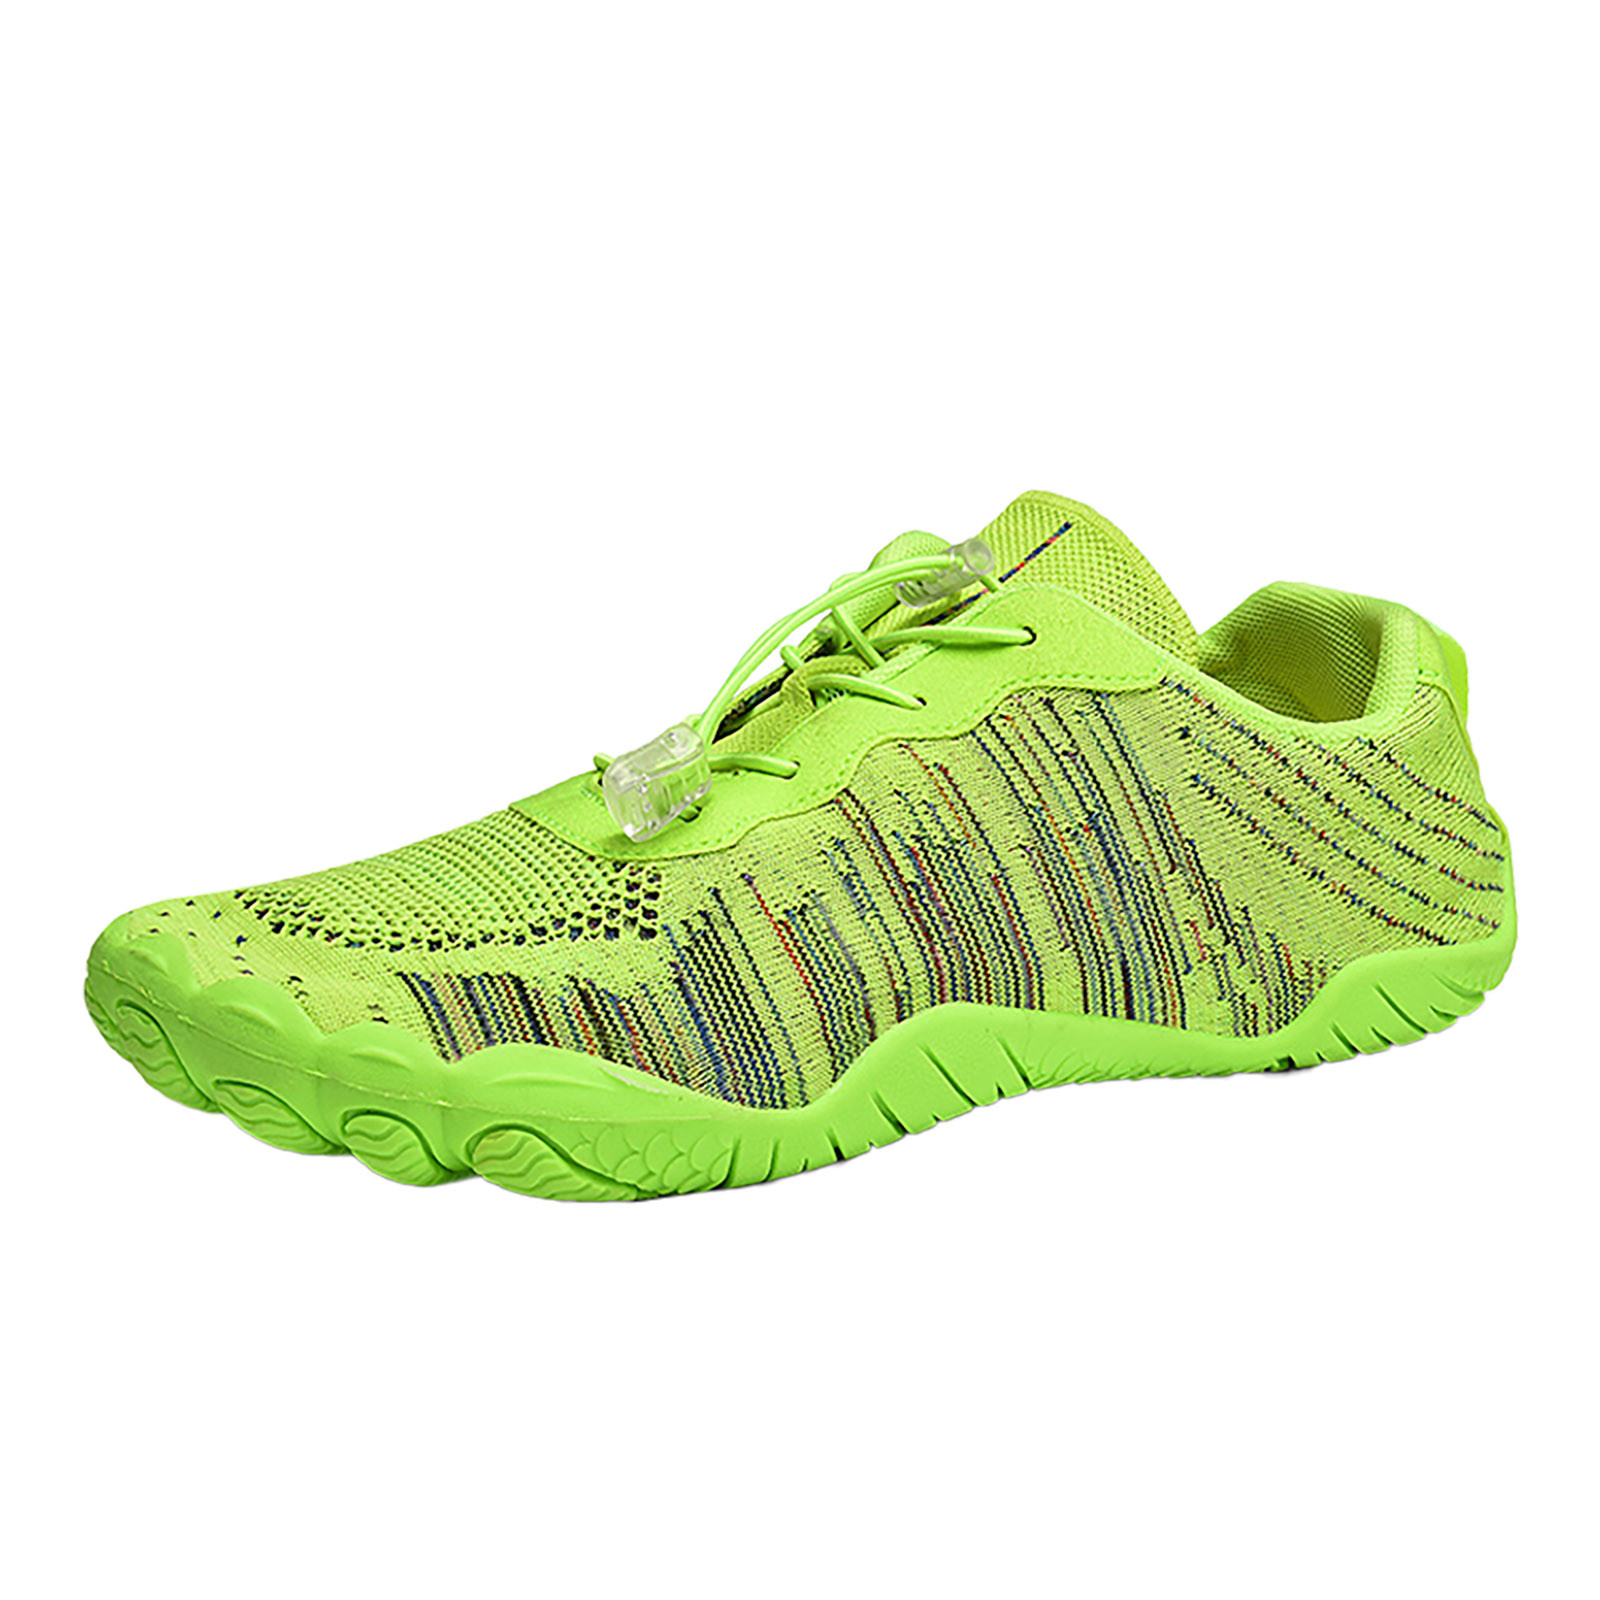 Ierhent Men's Shoes Running Shoes for Men Lightweight Breathable Mesh ...